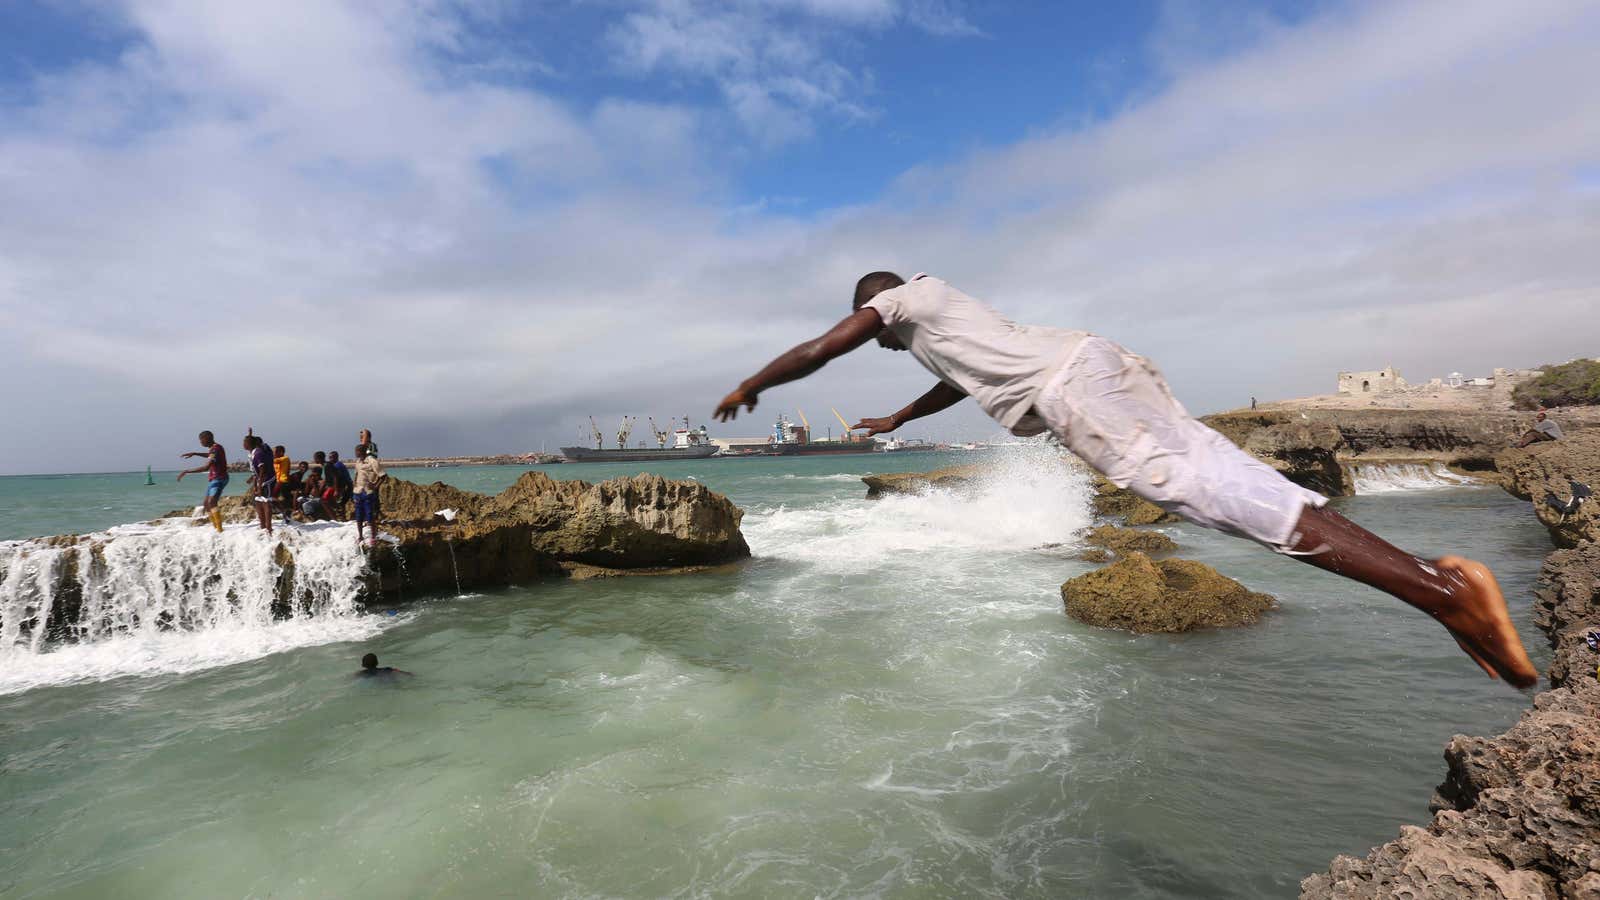 Diving into the Indian Ocean waters at Lido beach in Mogadishu.